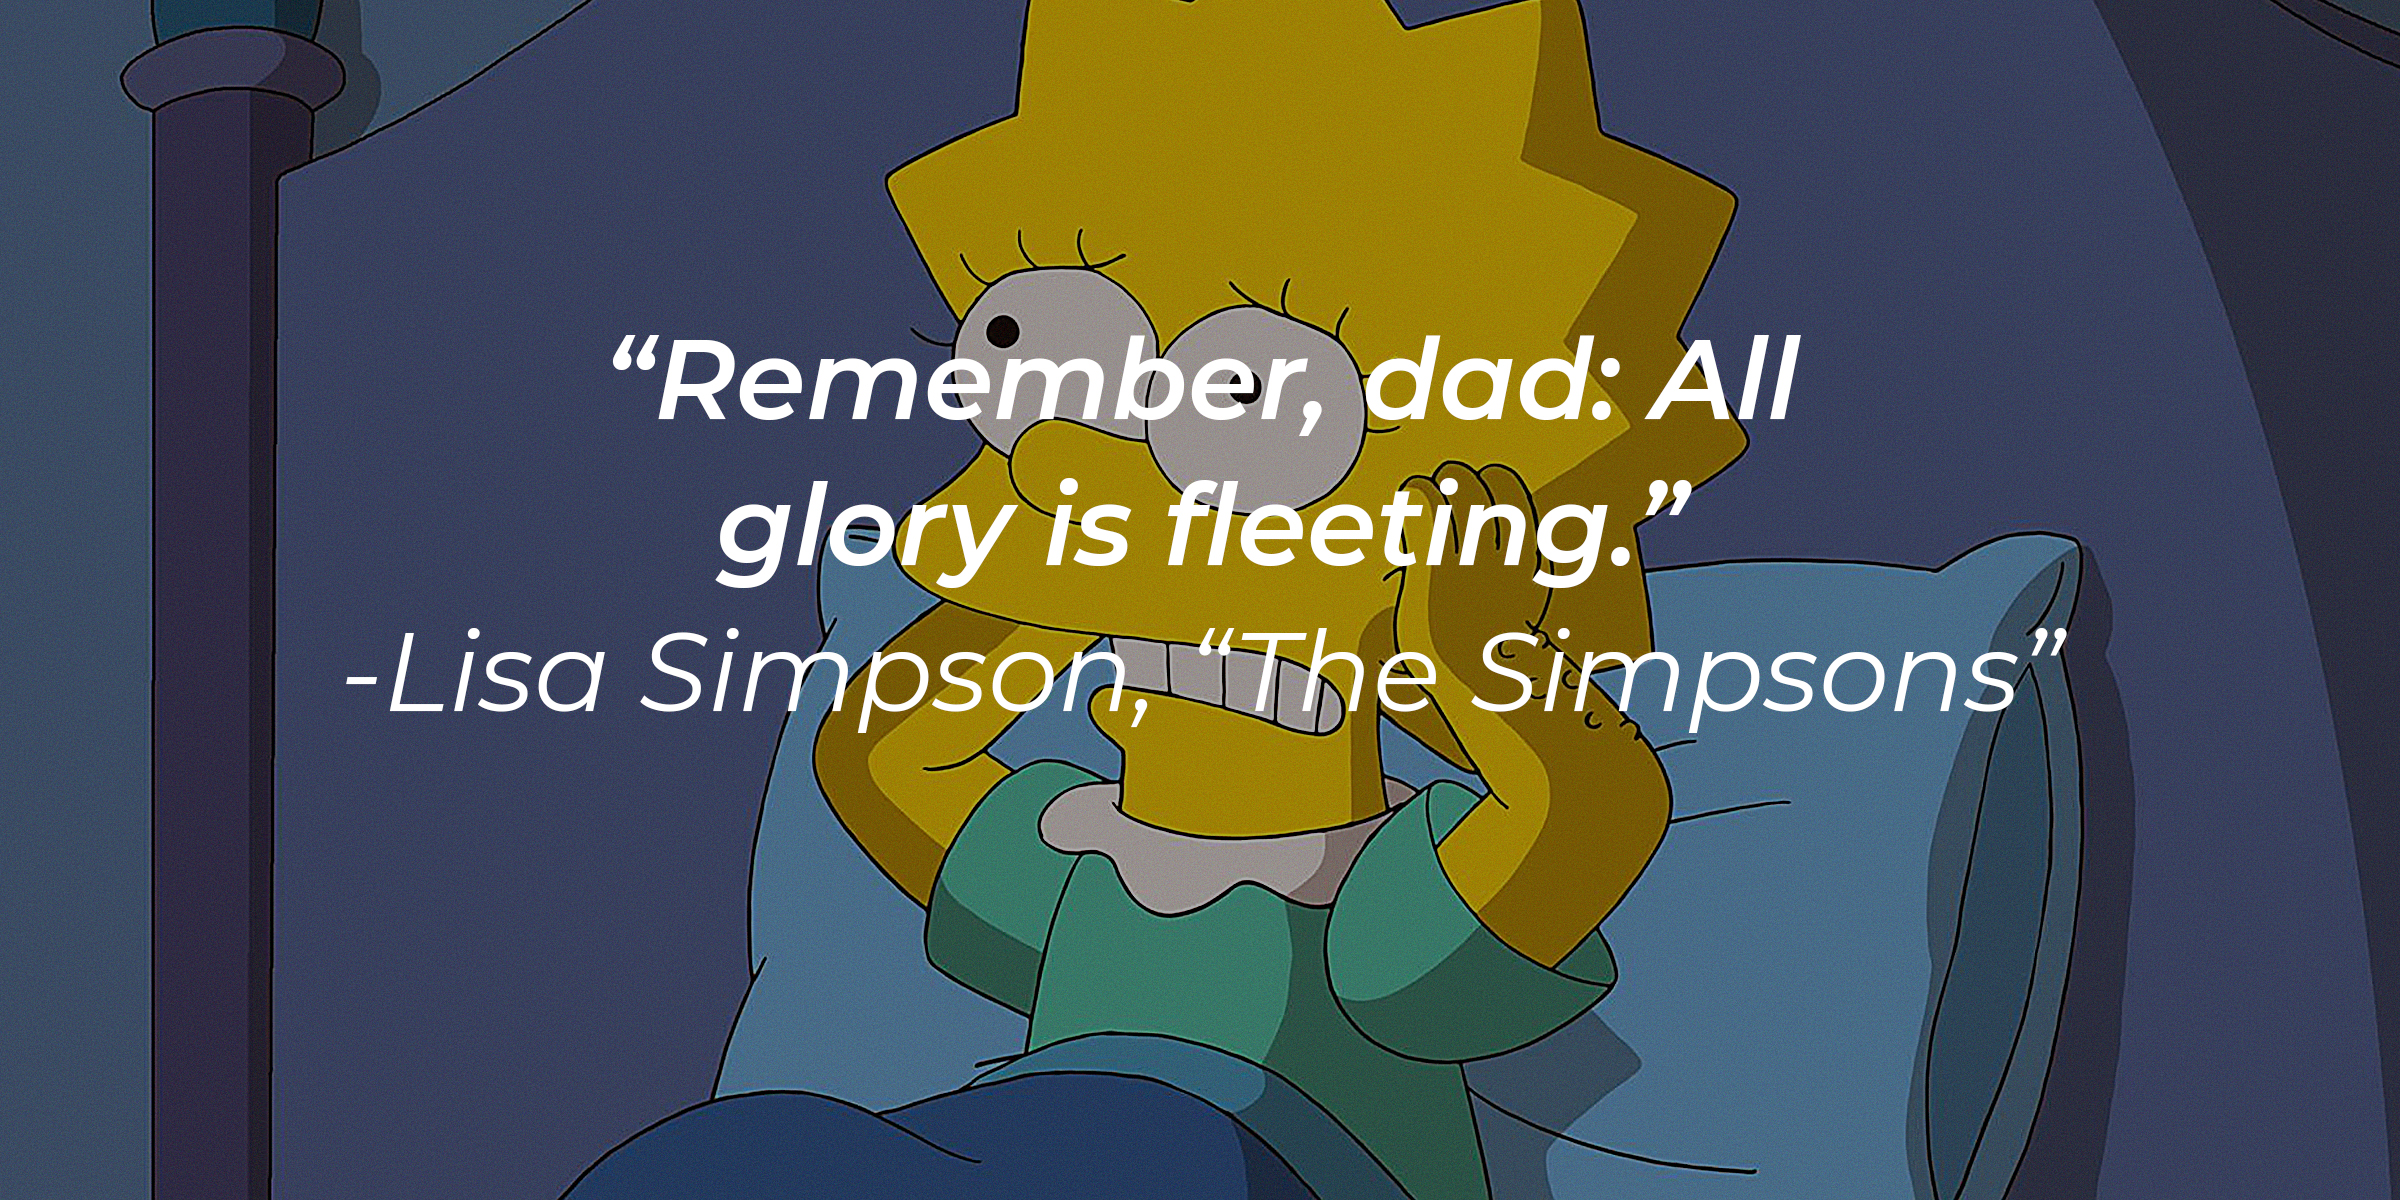 Lisa Simpson with her quote: "Remember, dad: All glory is fleeting." | Source: Facebook.com/TheSimpsons